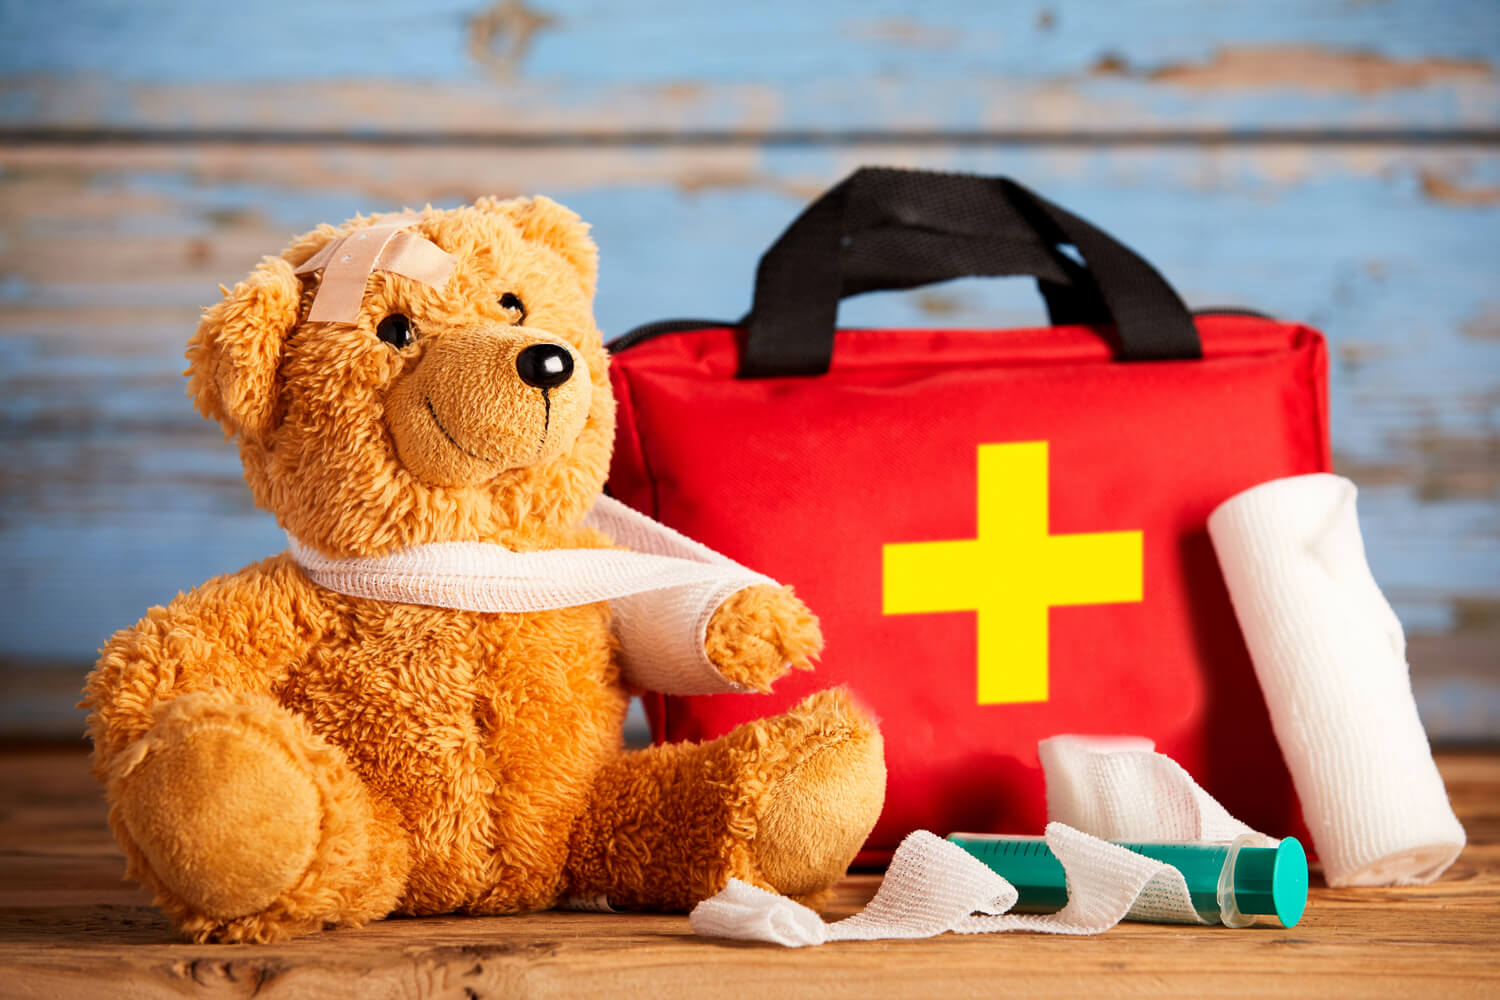 First Aid Kit For Babies – Why Do You Need it and How to Make it? by Dr Chetan Ginigeri